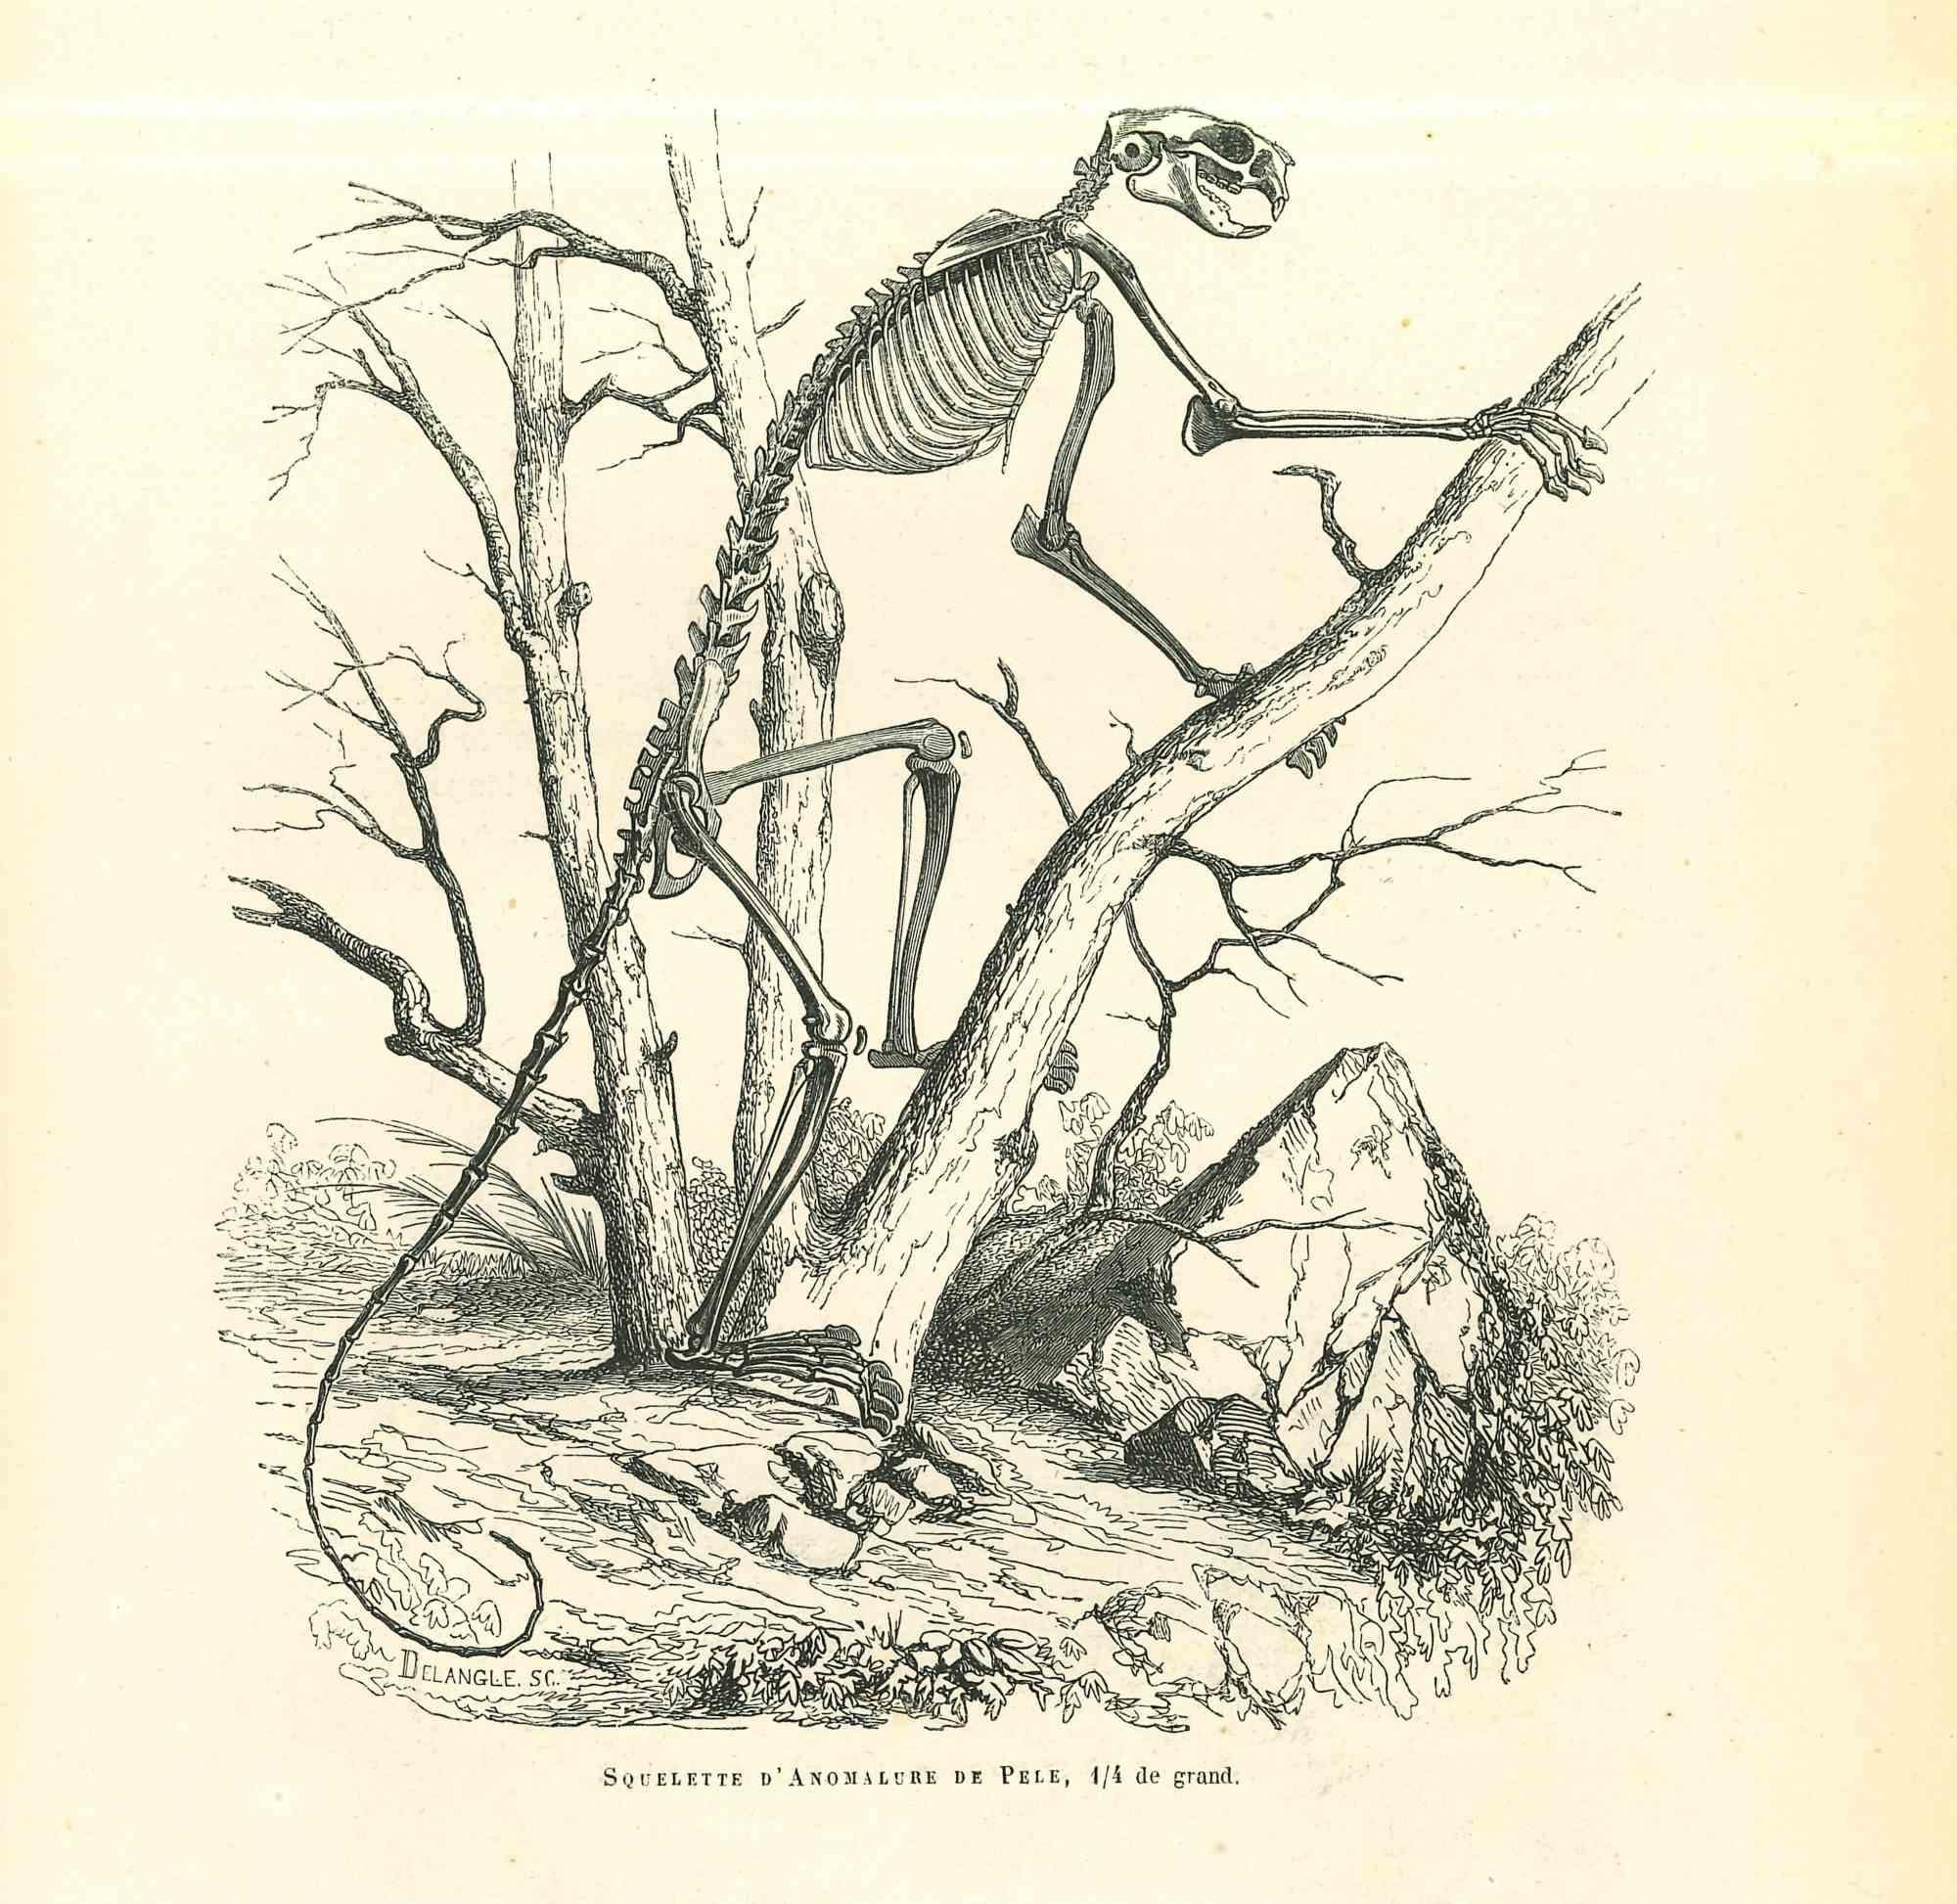 The Animal Skeleton is an original lithograph on ivory-colored paper, realized by Paul Gervais (1816-1879). The artwork is from The Series of "Les Trois Règnes de la Nature", and was published in 1854.

Good conditions.

Titled on the lower. With